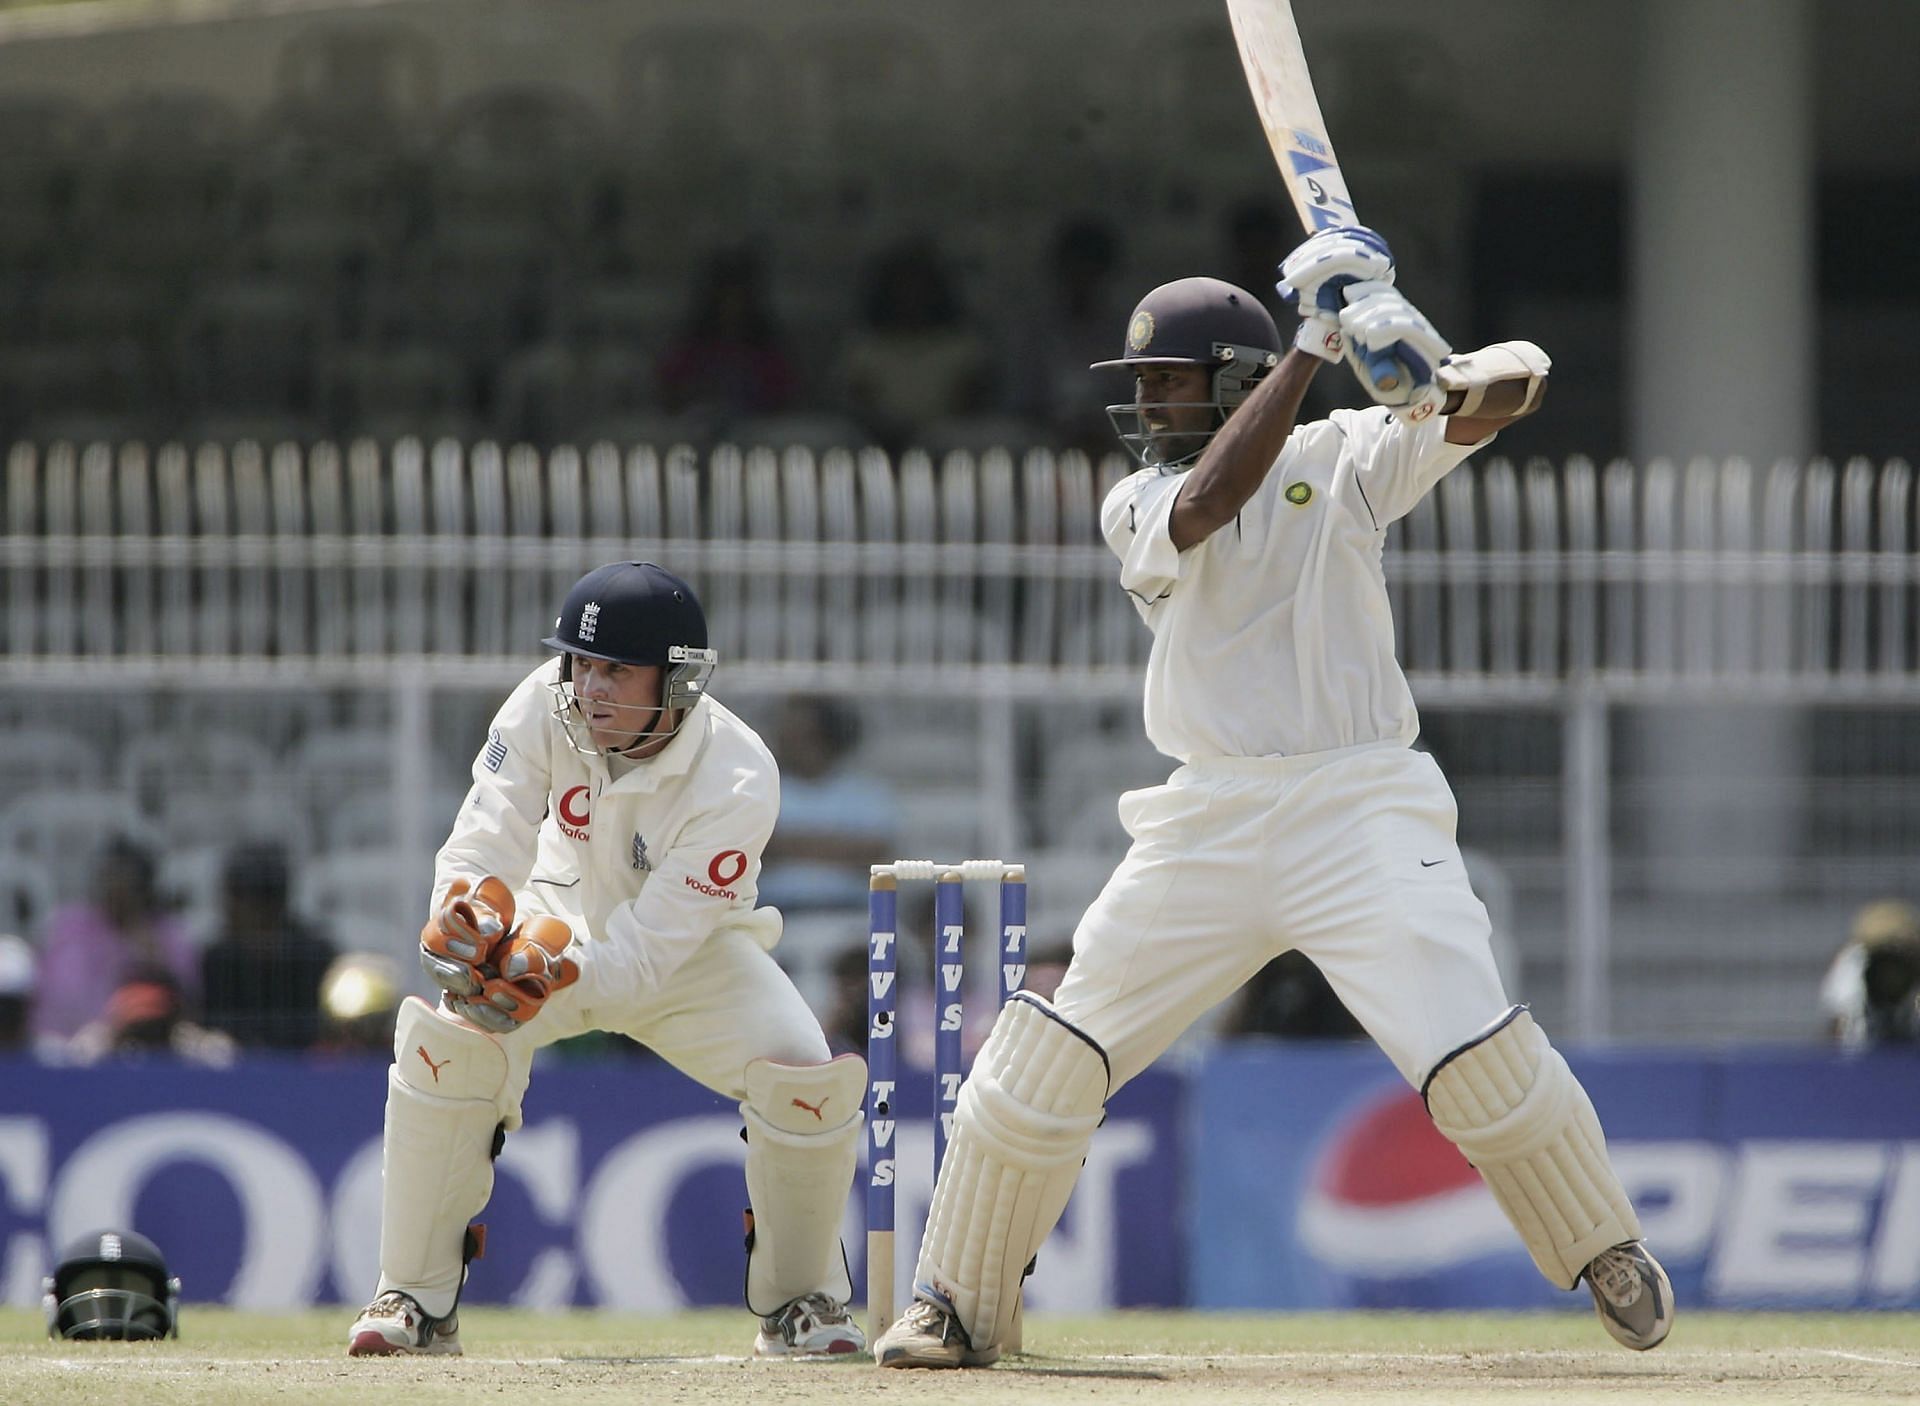 Wasim Jaffer is the leading run-getter in the Ranji Trophy. (Pic: Getty Images)